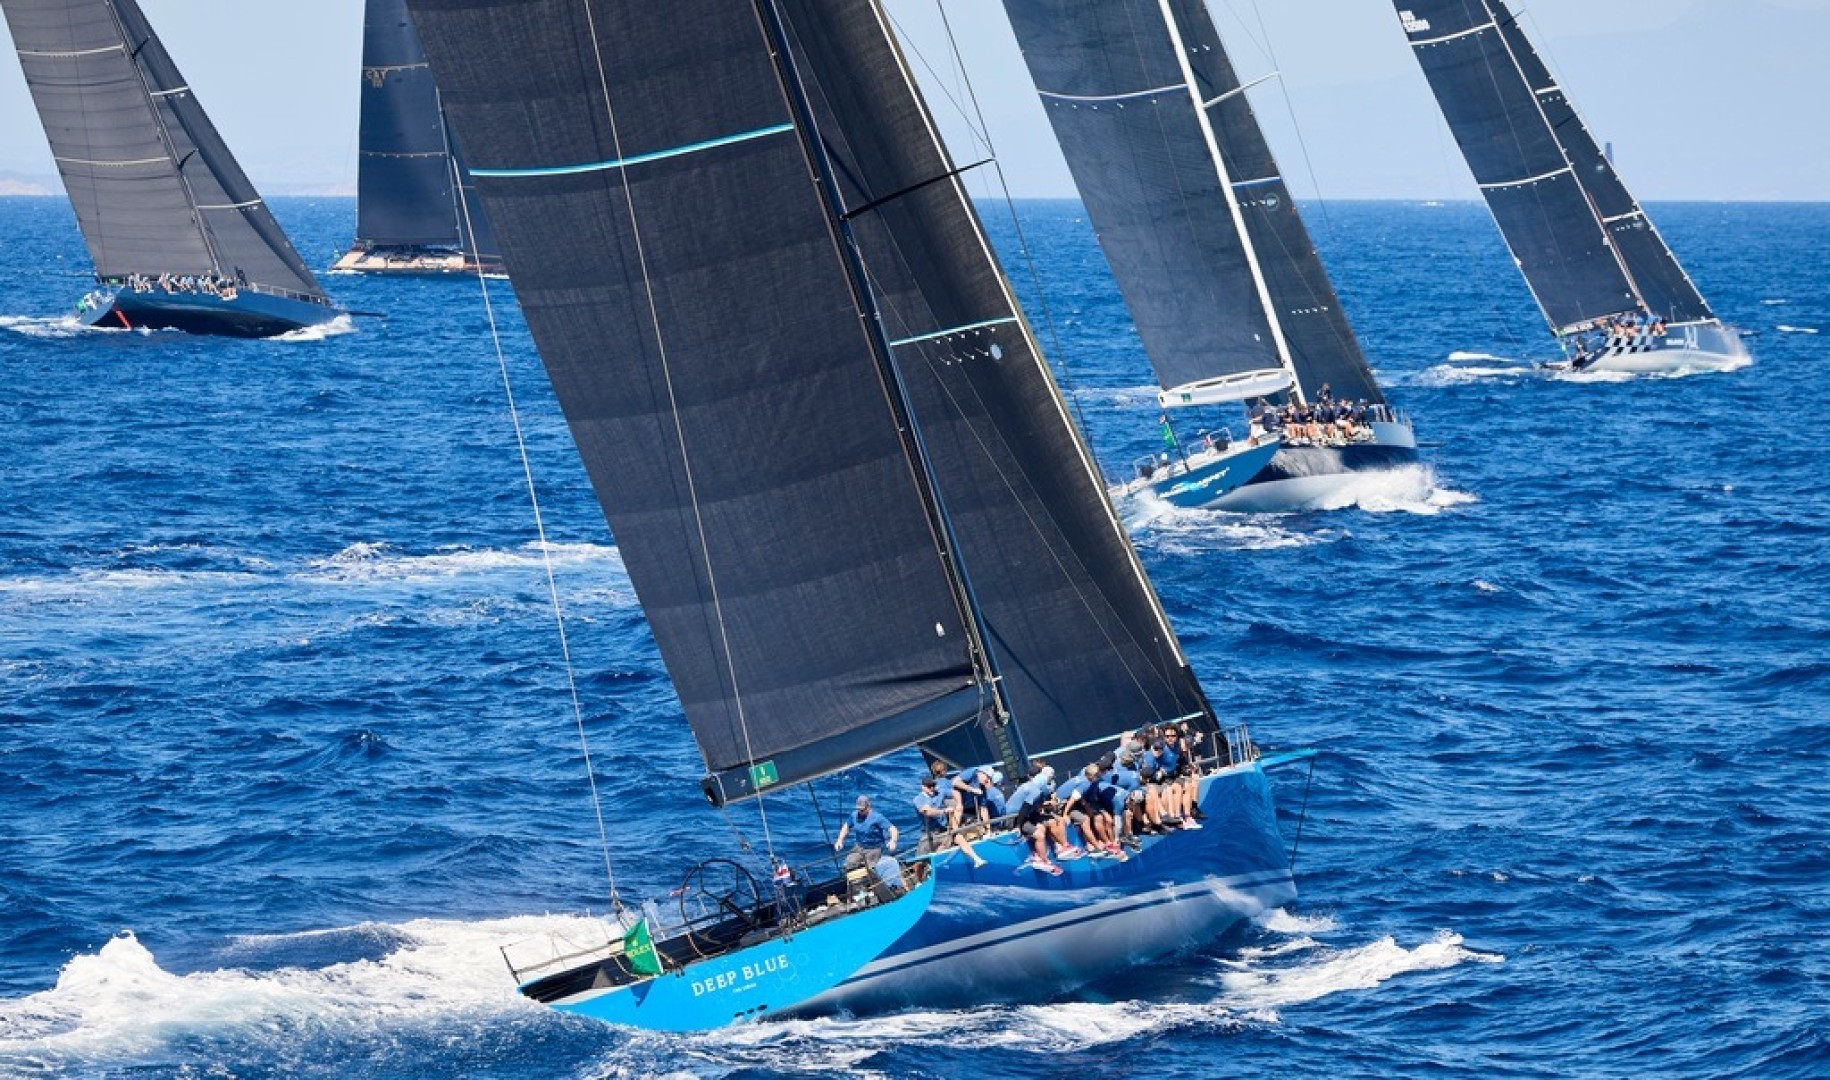 Wendy Schmidt's Botin 85 Deep Blue (USA) has entered the 2024 RORC Nelson's Cup Series in February

© Carlo Borlenghi/ ROLEX - 2023 Maxi Yacht Rolex Cup